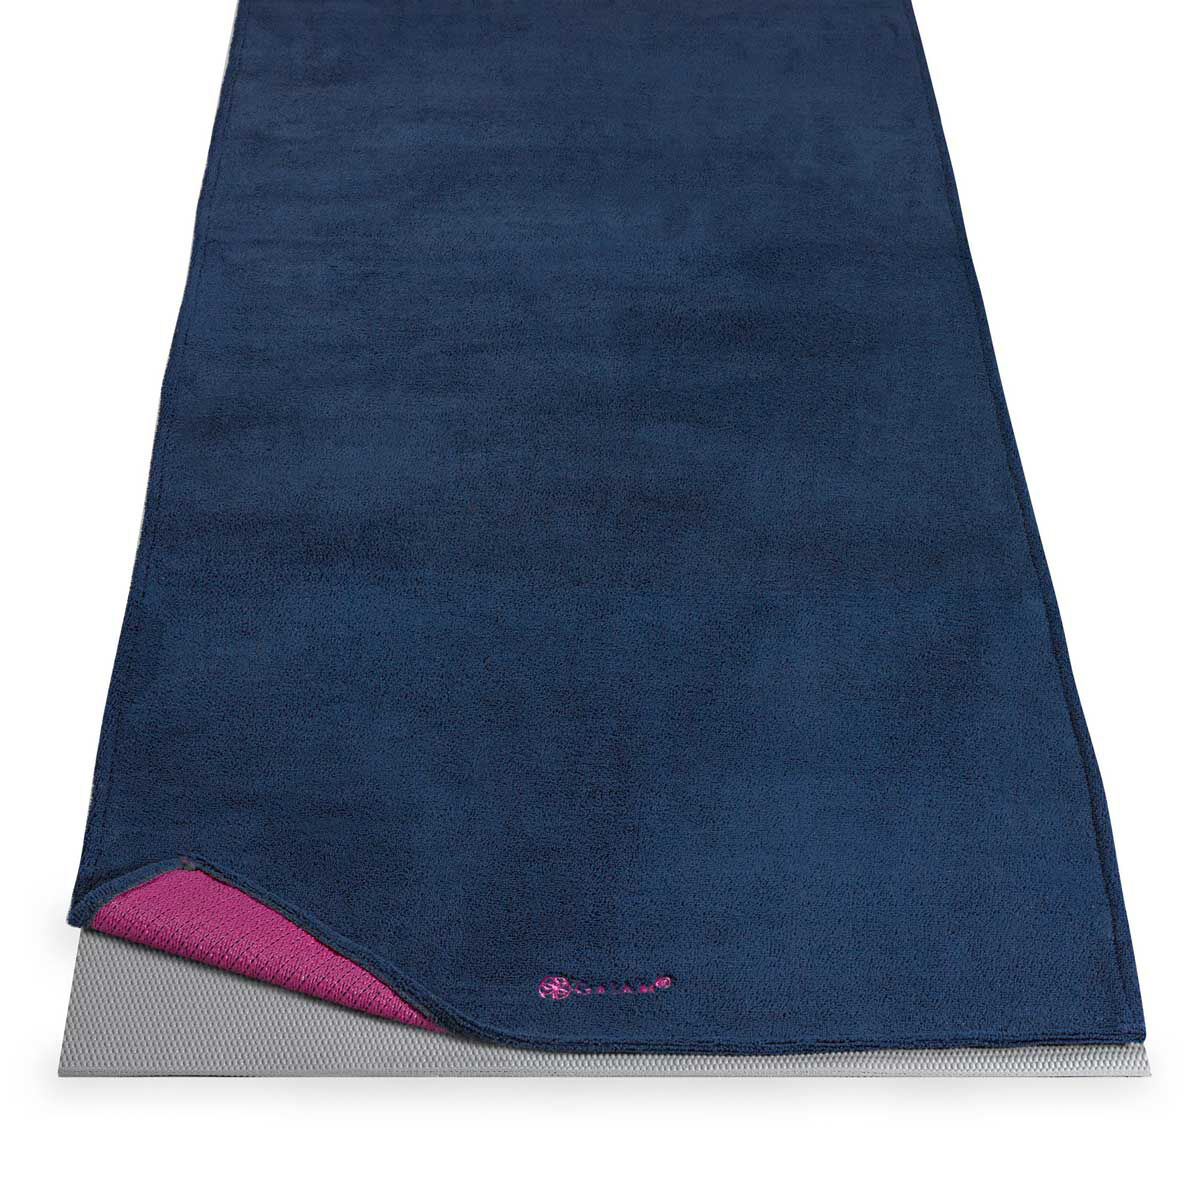 Instantly Improve Your Practice From Cleve Hygienic and Sweat Free Workout For Men & Women Super Absorbent Microfiber Yoga Towel Set For A Non-Slip Hot Yoga Mat Towel With Matching Hand Towel 